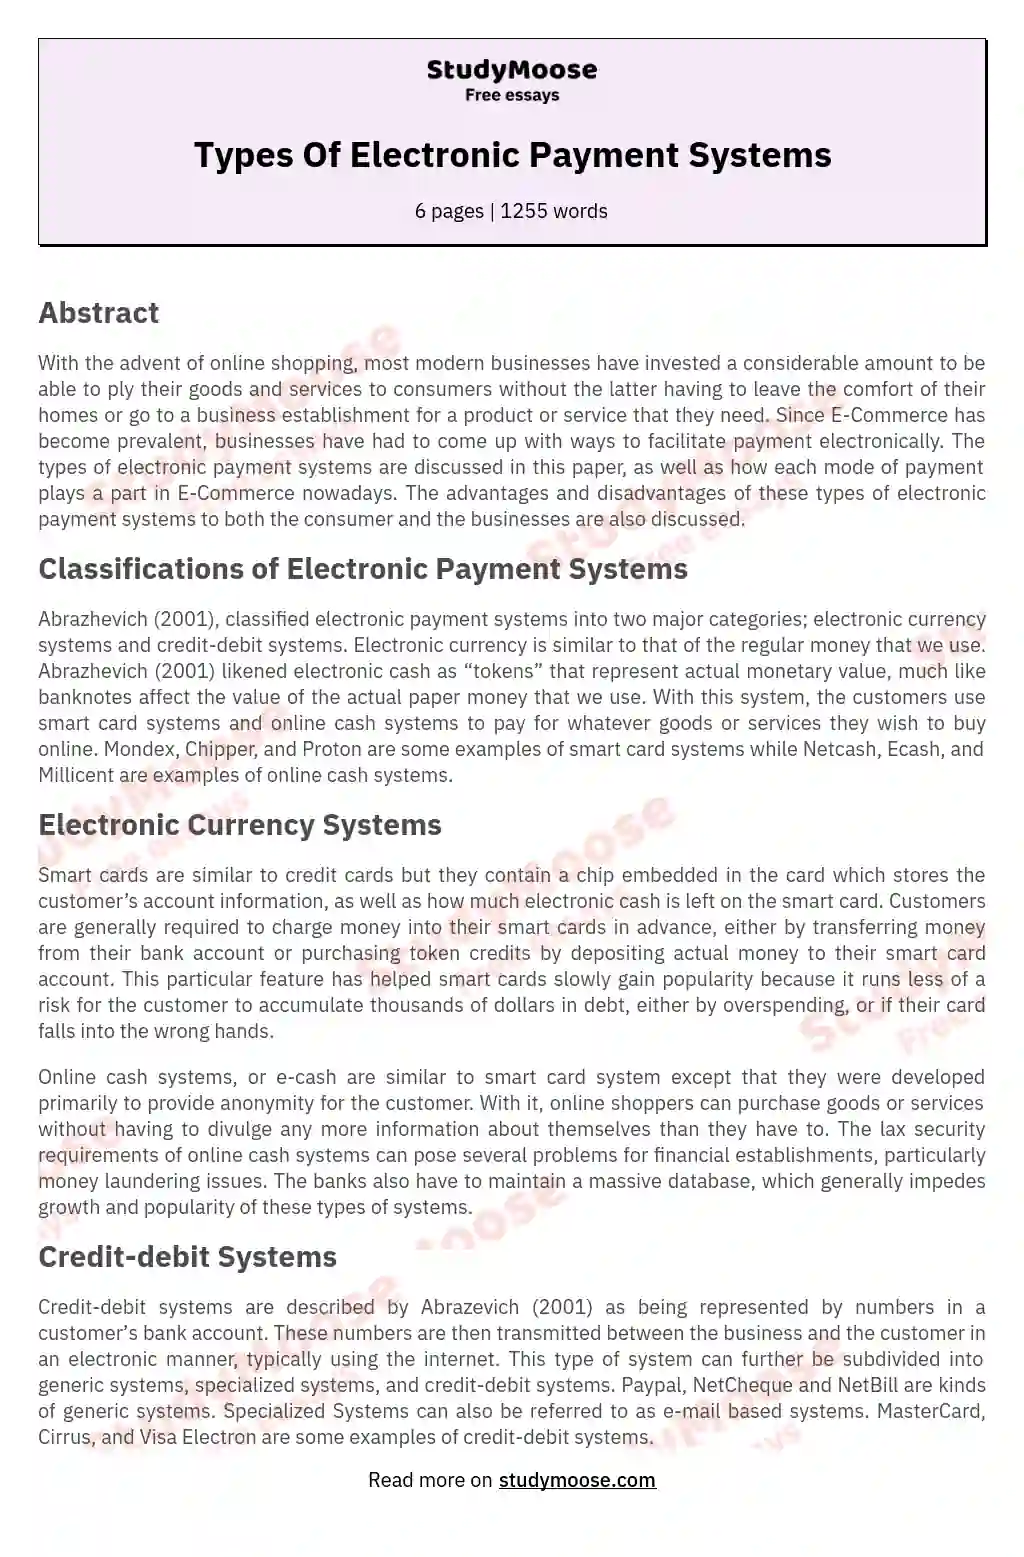 Types Of Electronic Payment Systems essay